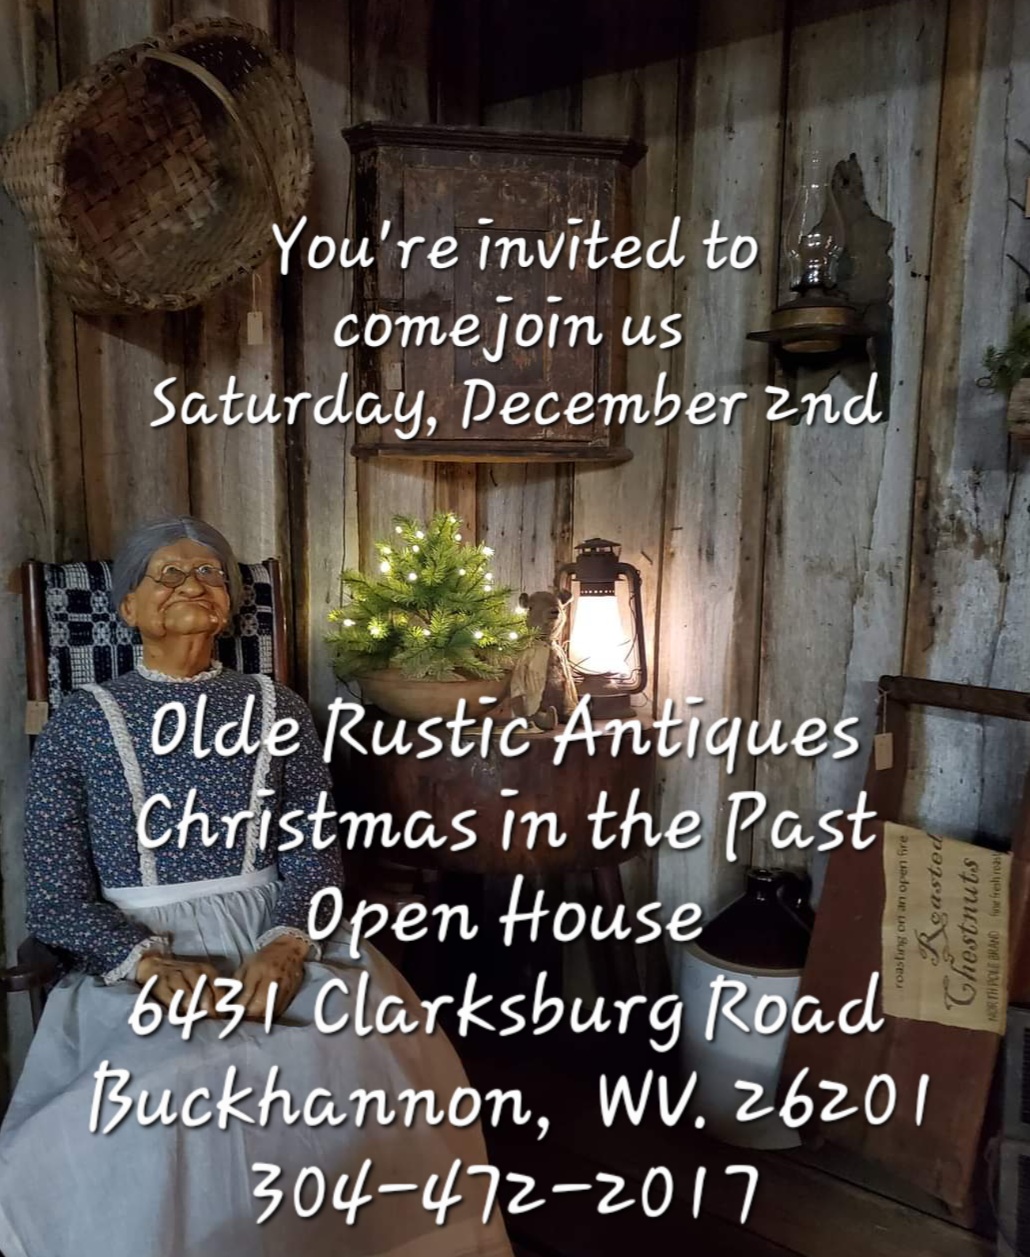 Annual Christmas in The Past Open House